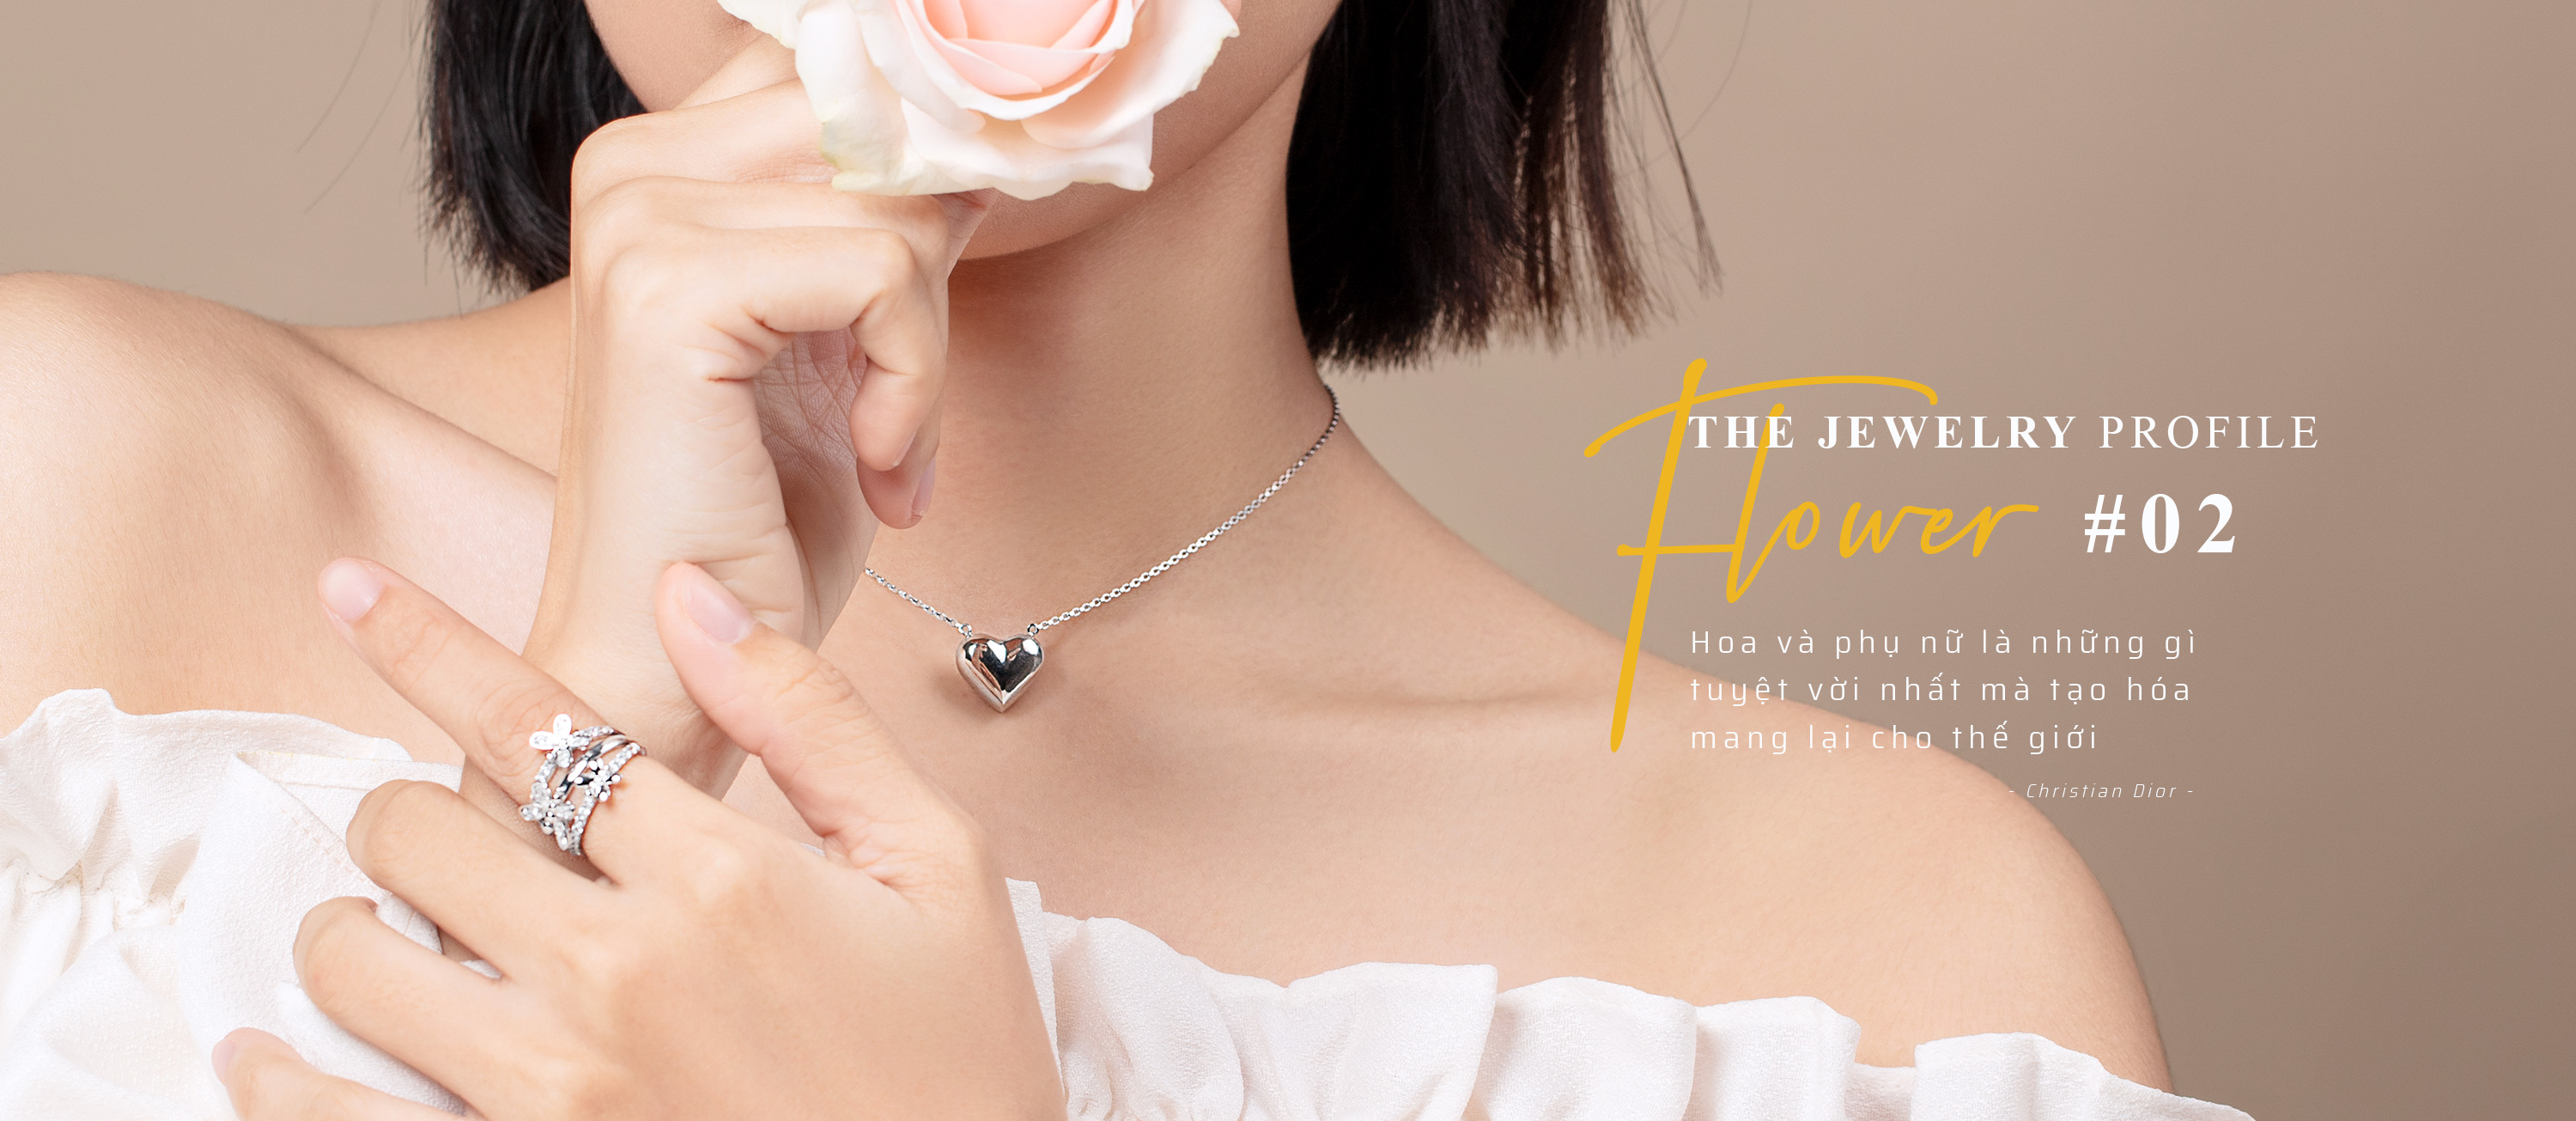 The Jewelry Profile #02: Flower